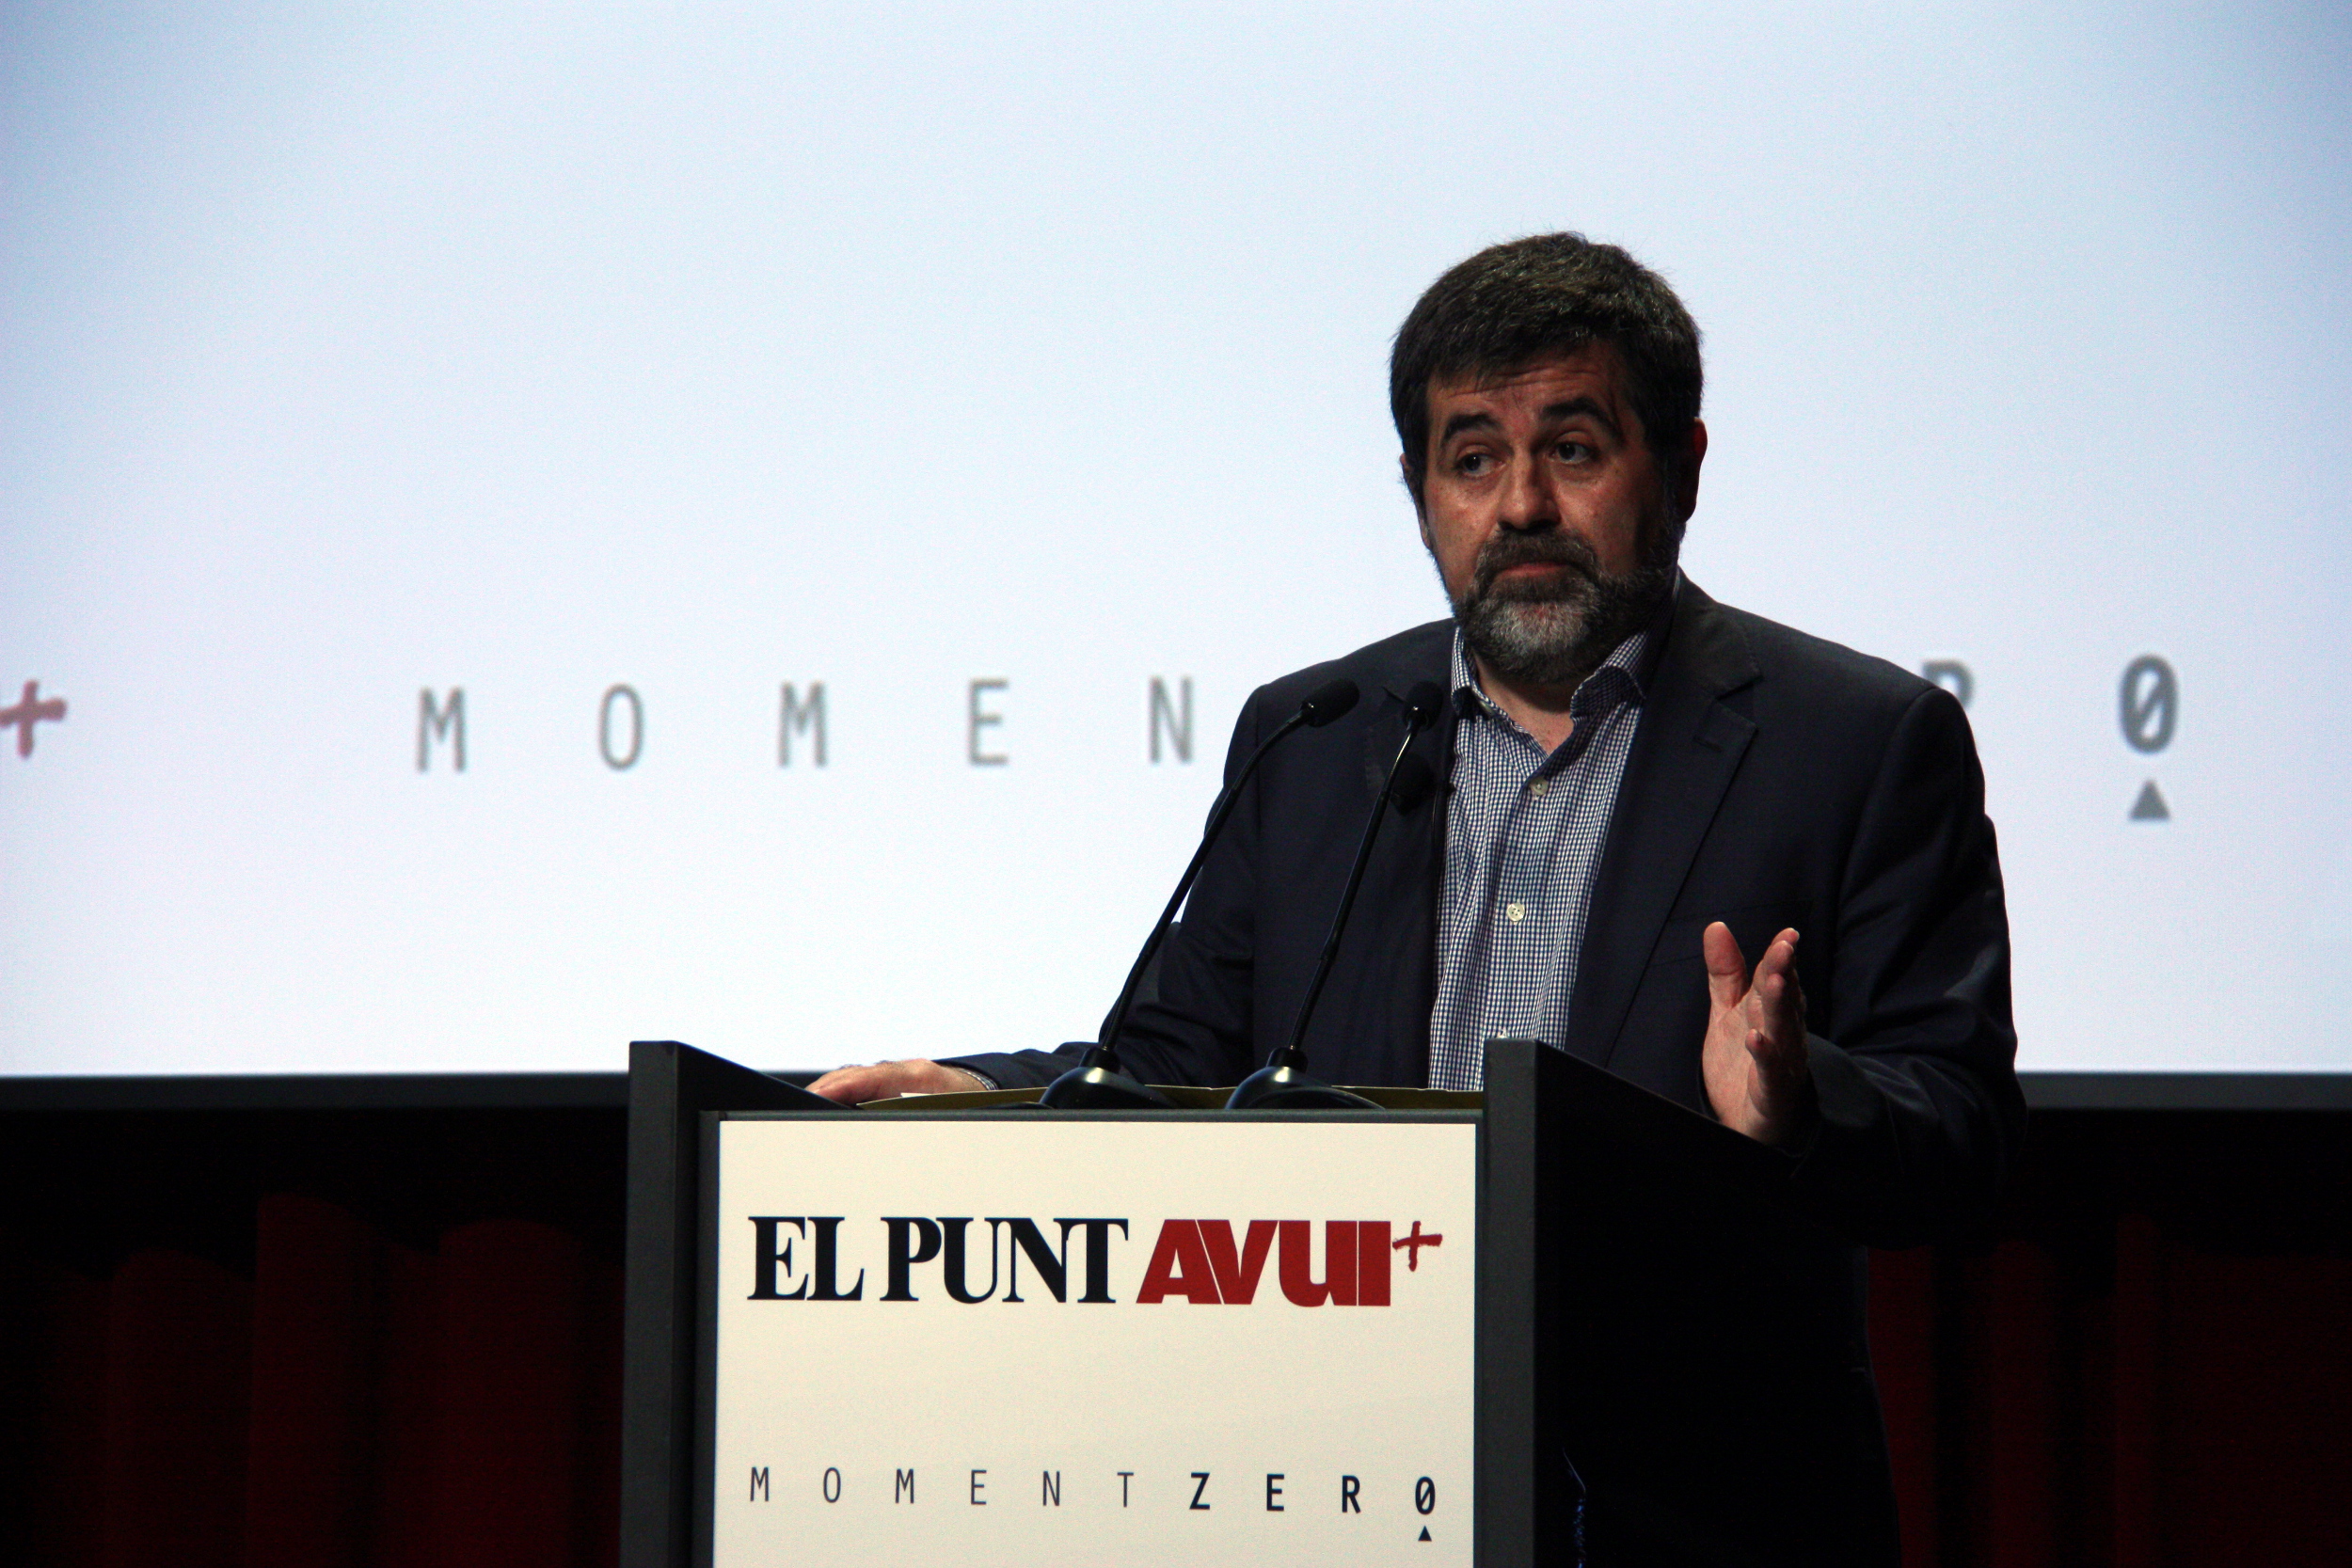 The President of the ANC, Jordi Sánchez, during the 'Moment Zero' event (by ACN)